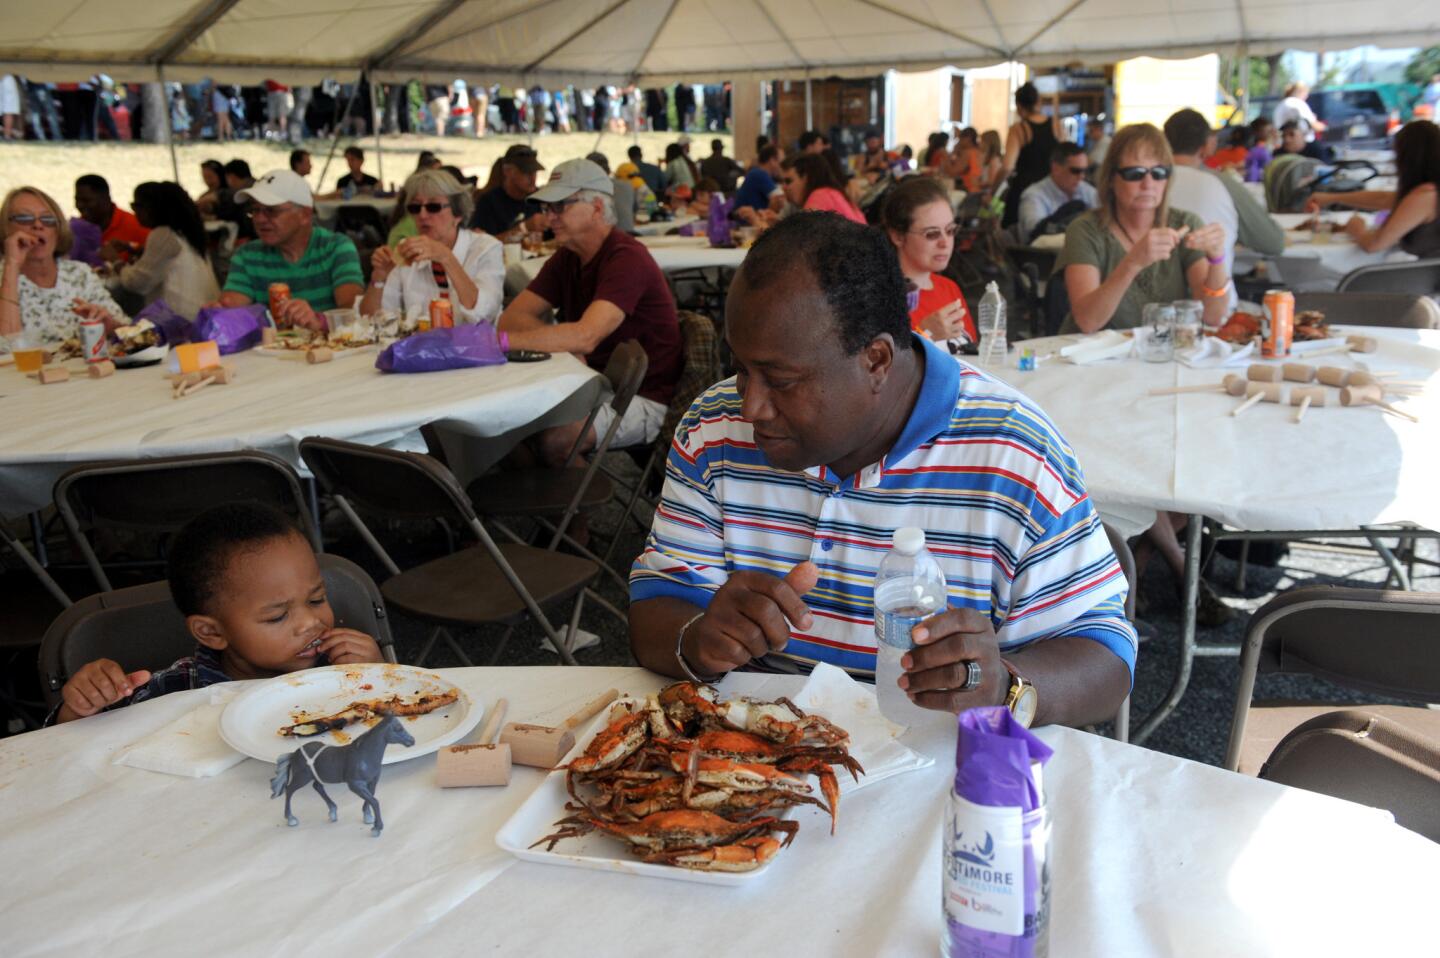 Some of Baltimore’s favorite restaurants will serve up their signature seafood dishes at this family friendly waterfront festival. The activities include live music, cooking demonstration and a family area with toys, games, face painting and more. 2nd Annual Baltimore Seafood Festival, Sept. 9; noon to 6 p.m., Canton Waterfront Park, ; baltimoreseafoodfest.com